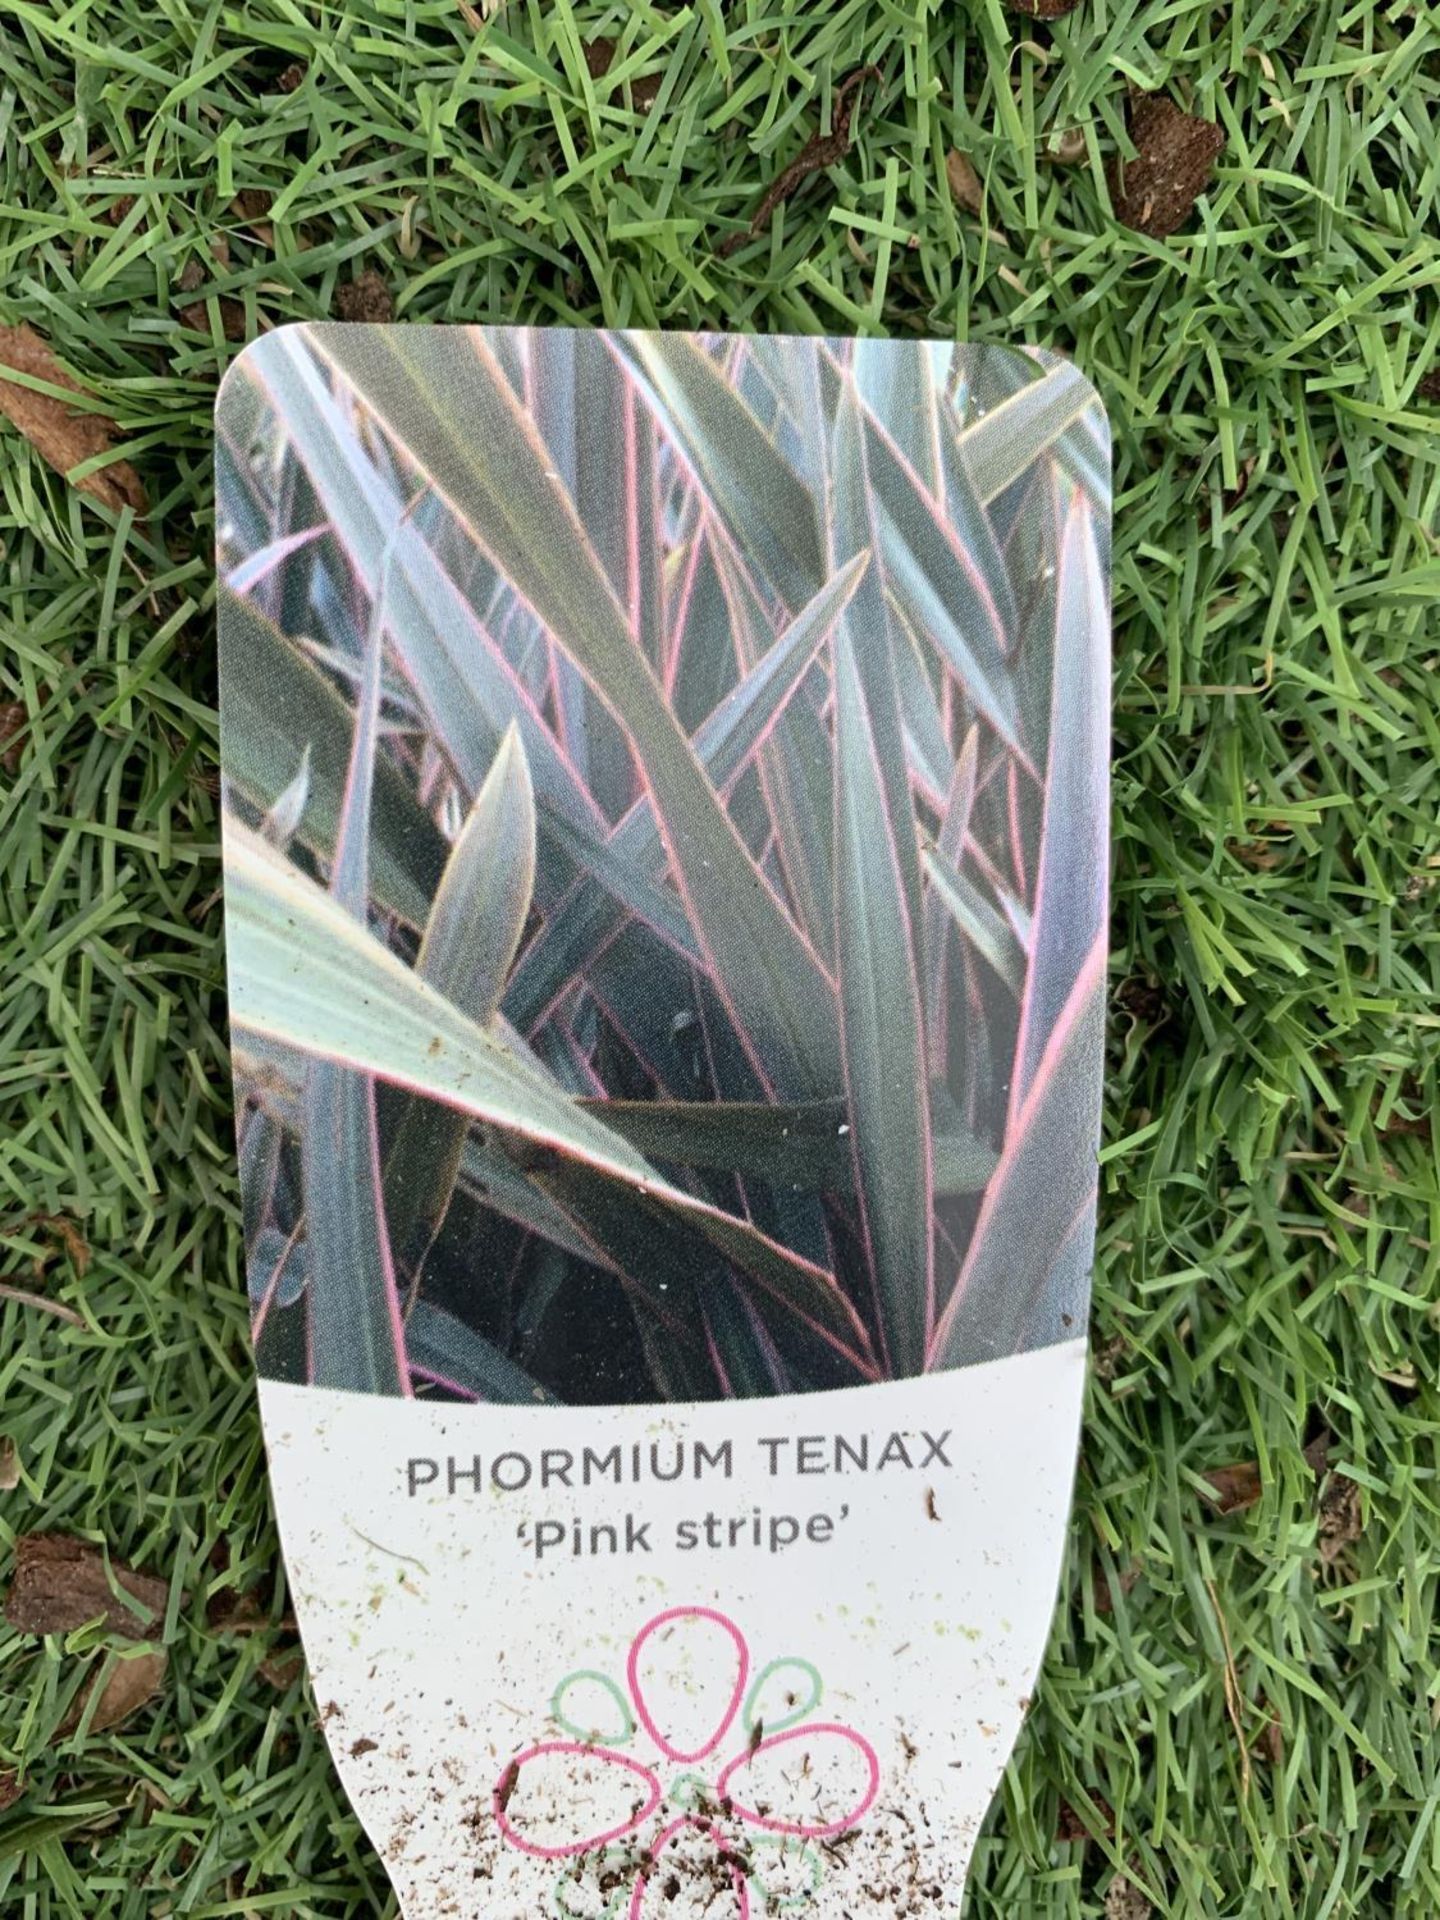 TWO PHORMIUM TENAX 'CREAM DELIGHT' AND 'PINK STRIPE' IN 3 LTR POTS OVER 1 METRE IN HEIGHT PLUS VAT - Image 4 of 6